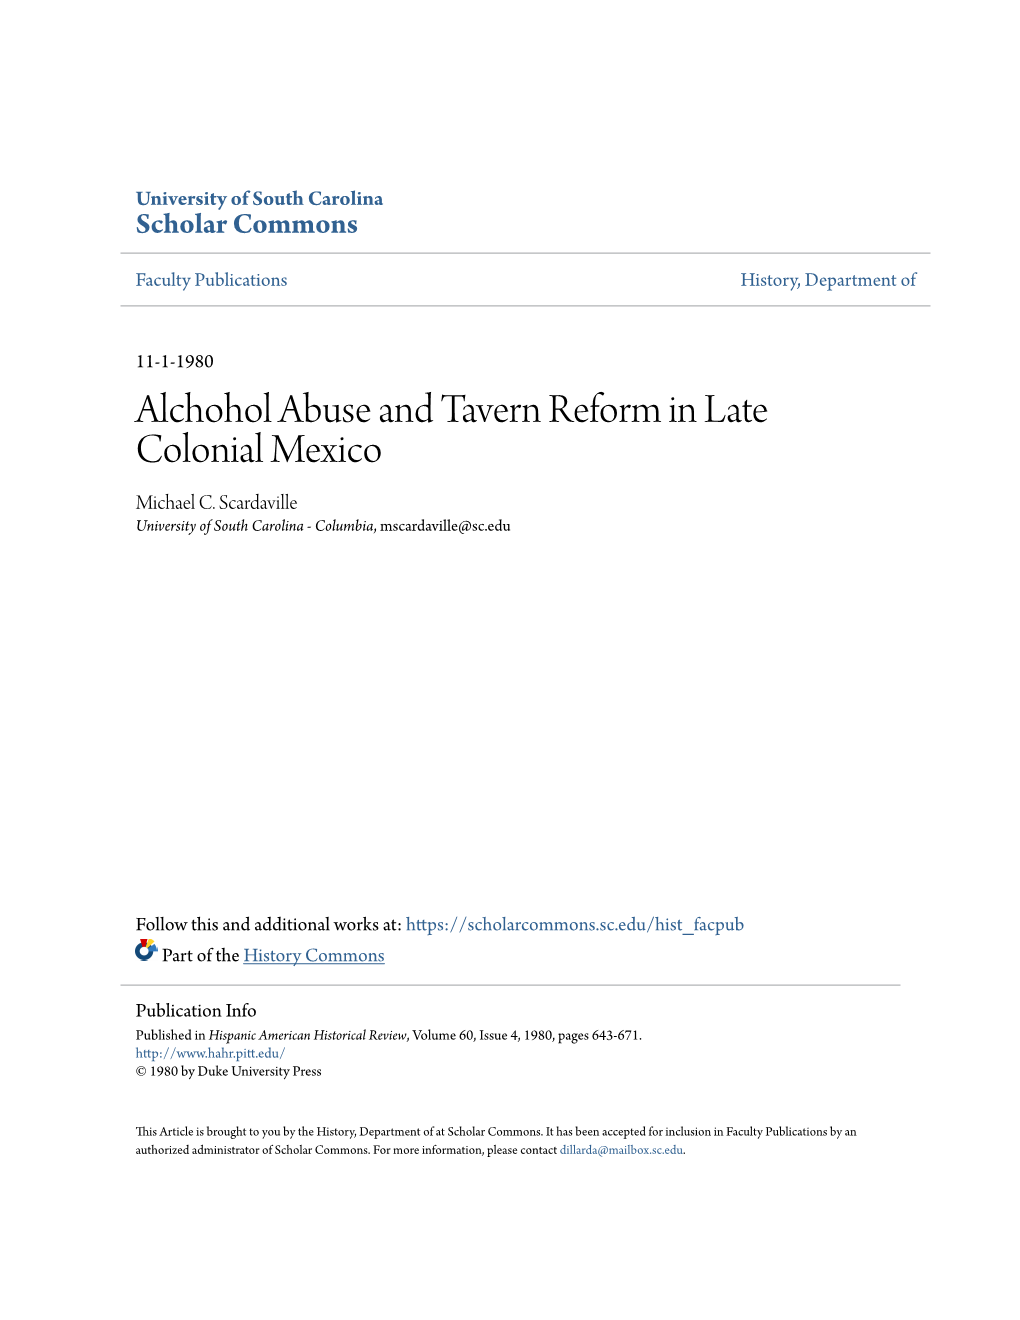 Alchohol Abuse and Tavern Reform in Late Colonial Mexico Michael C